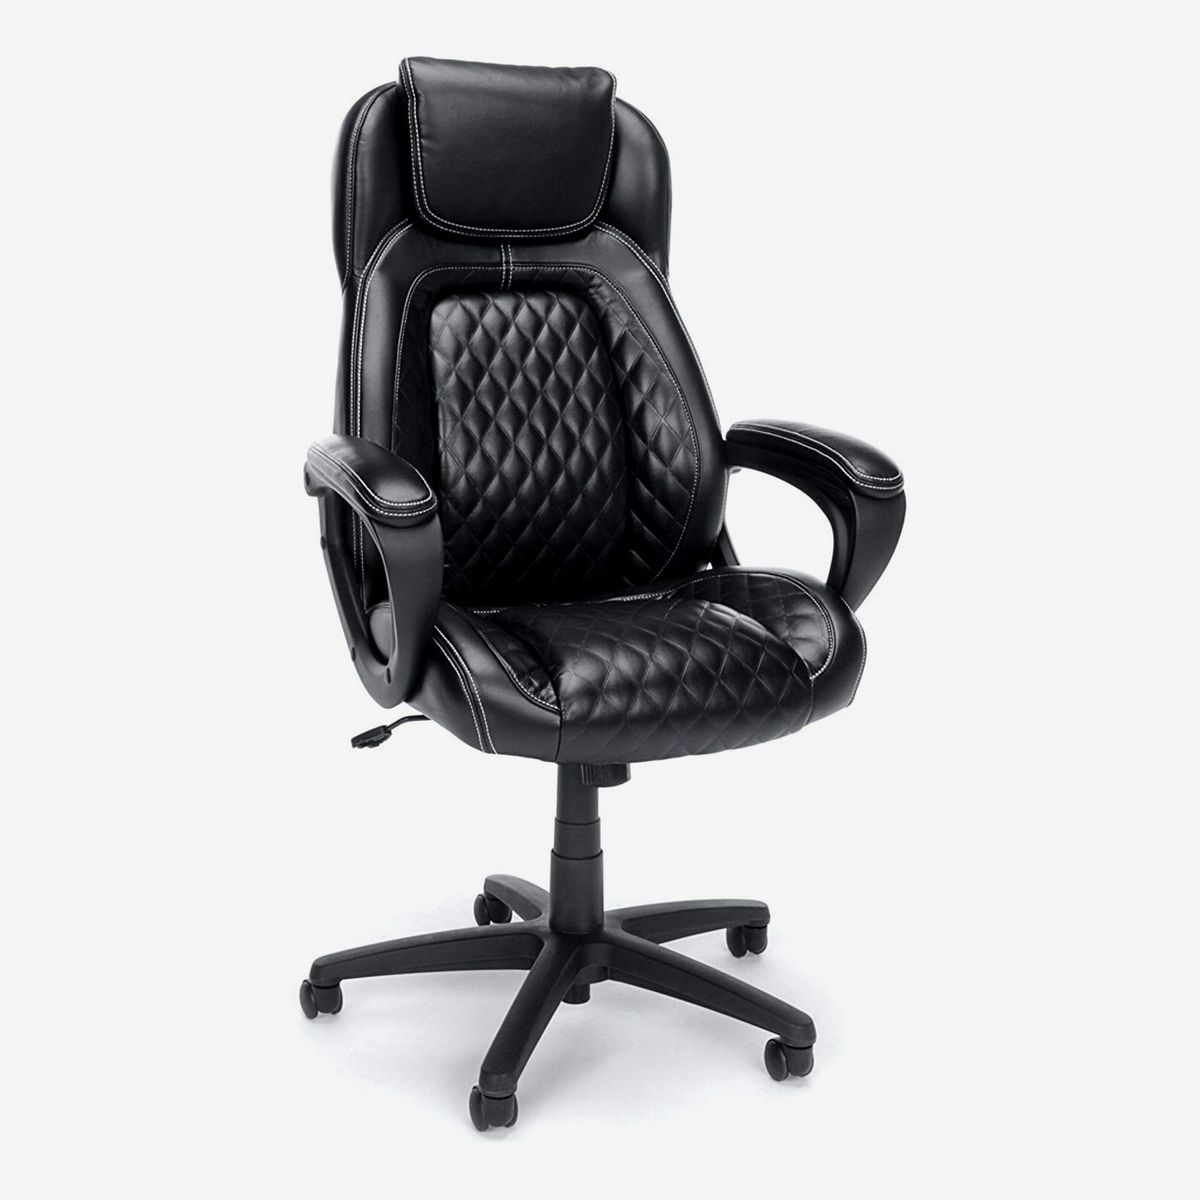 14 Best Office Chairs And Home, Most Comfortable Office Chair Uk 2020